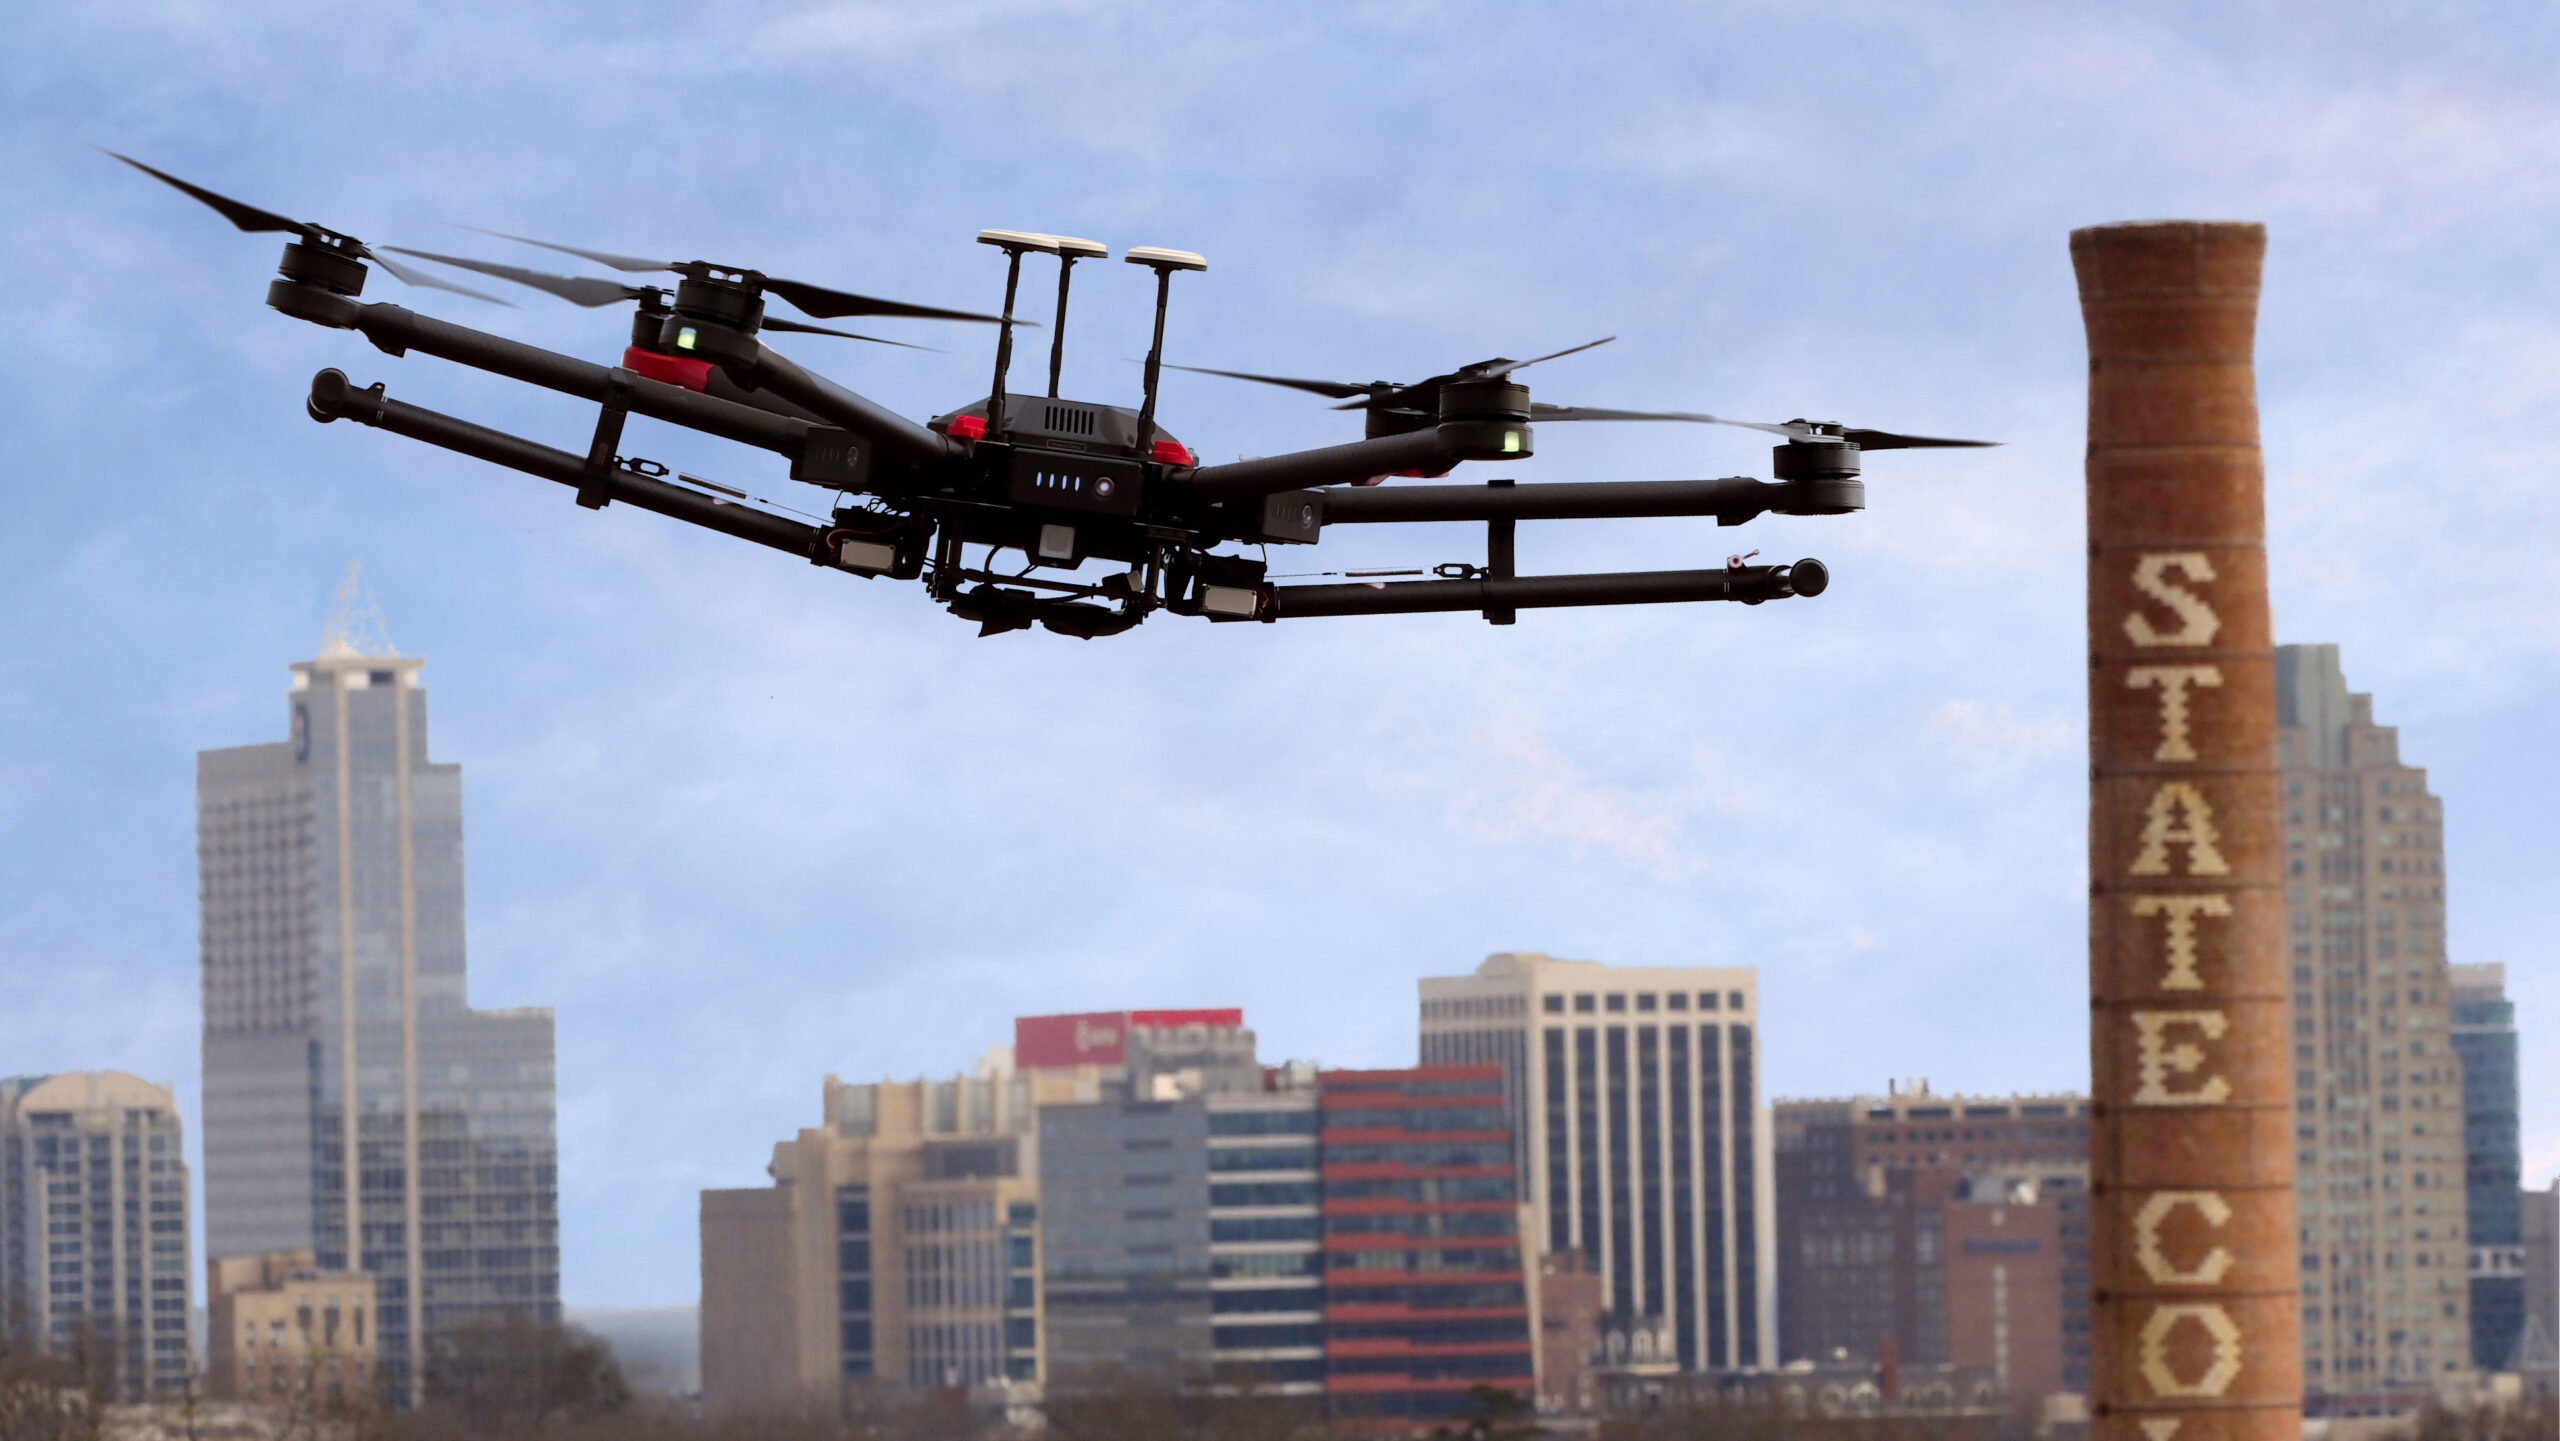 A drone flies over NC State campus with the Raleigh skyline in the background.